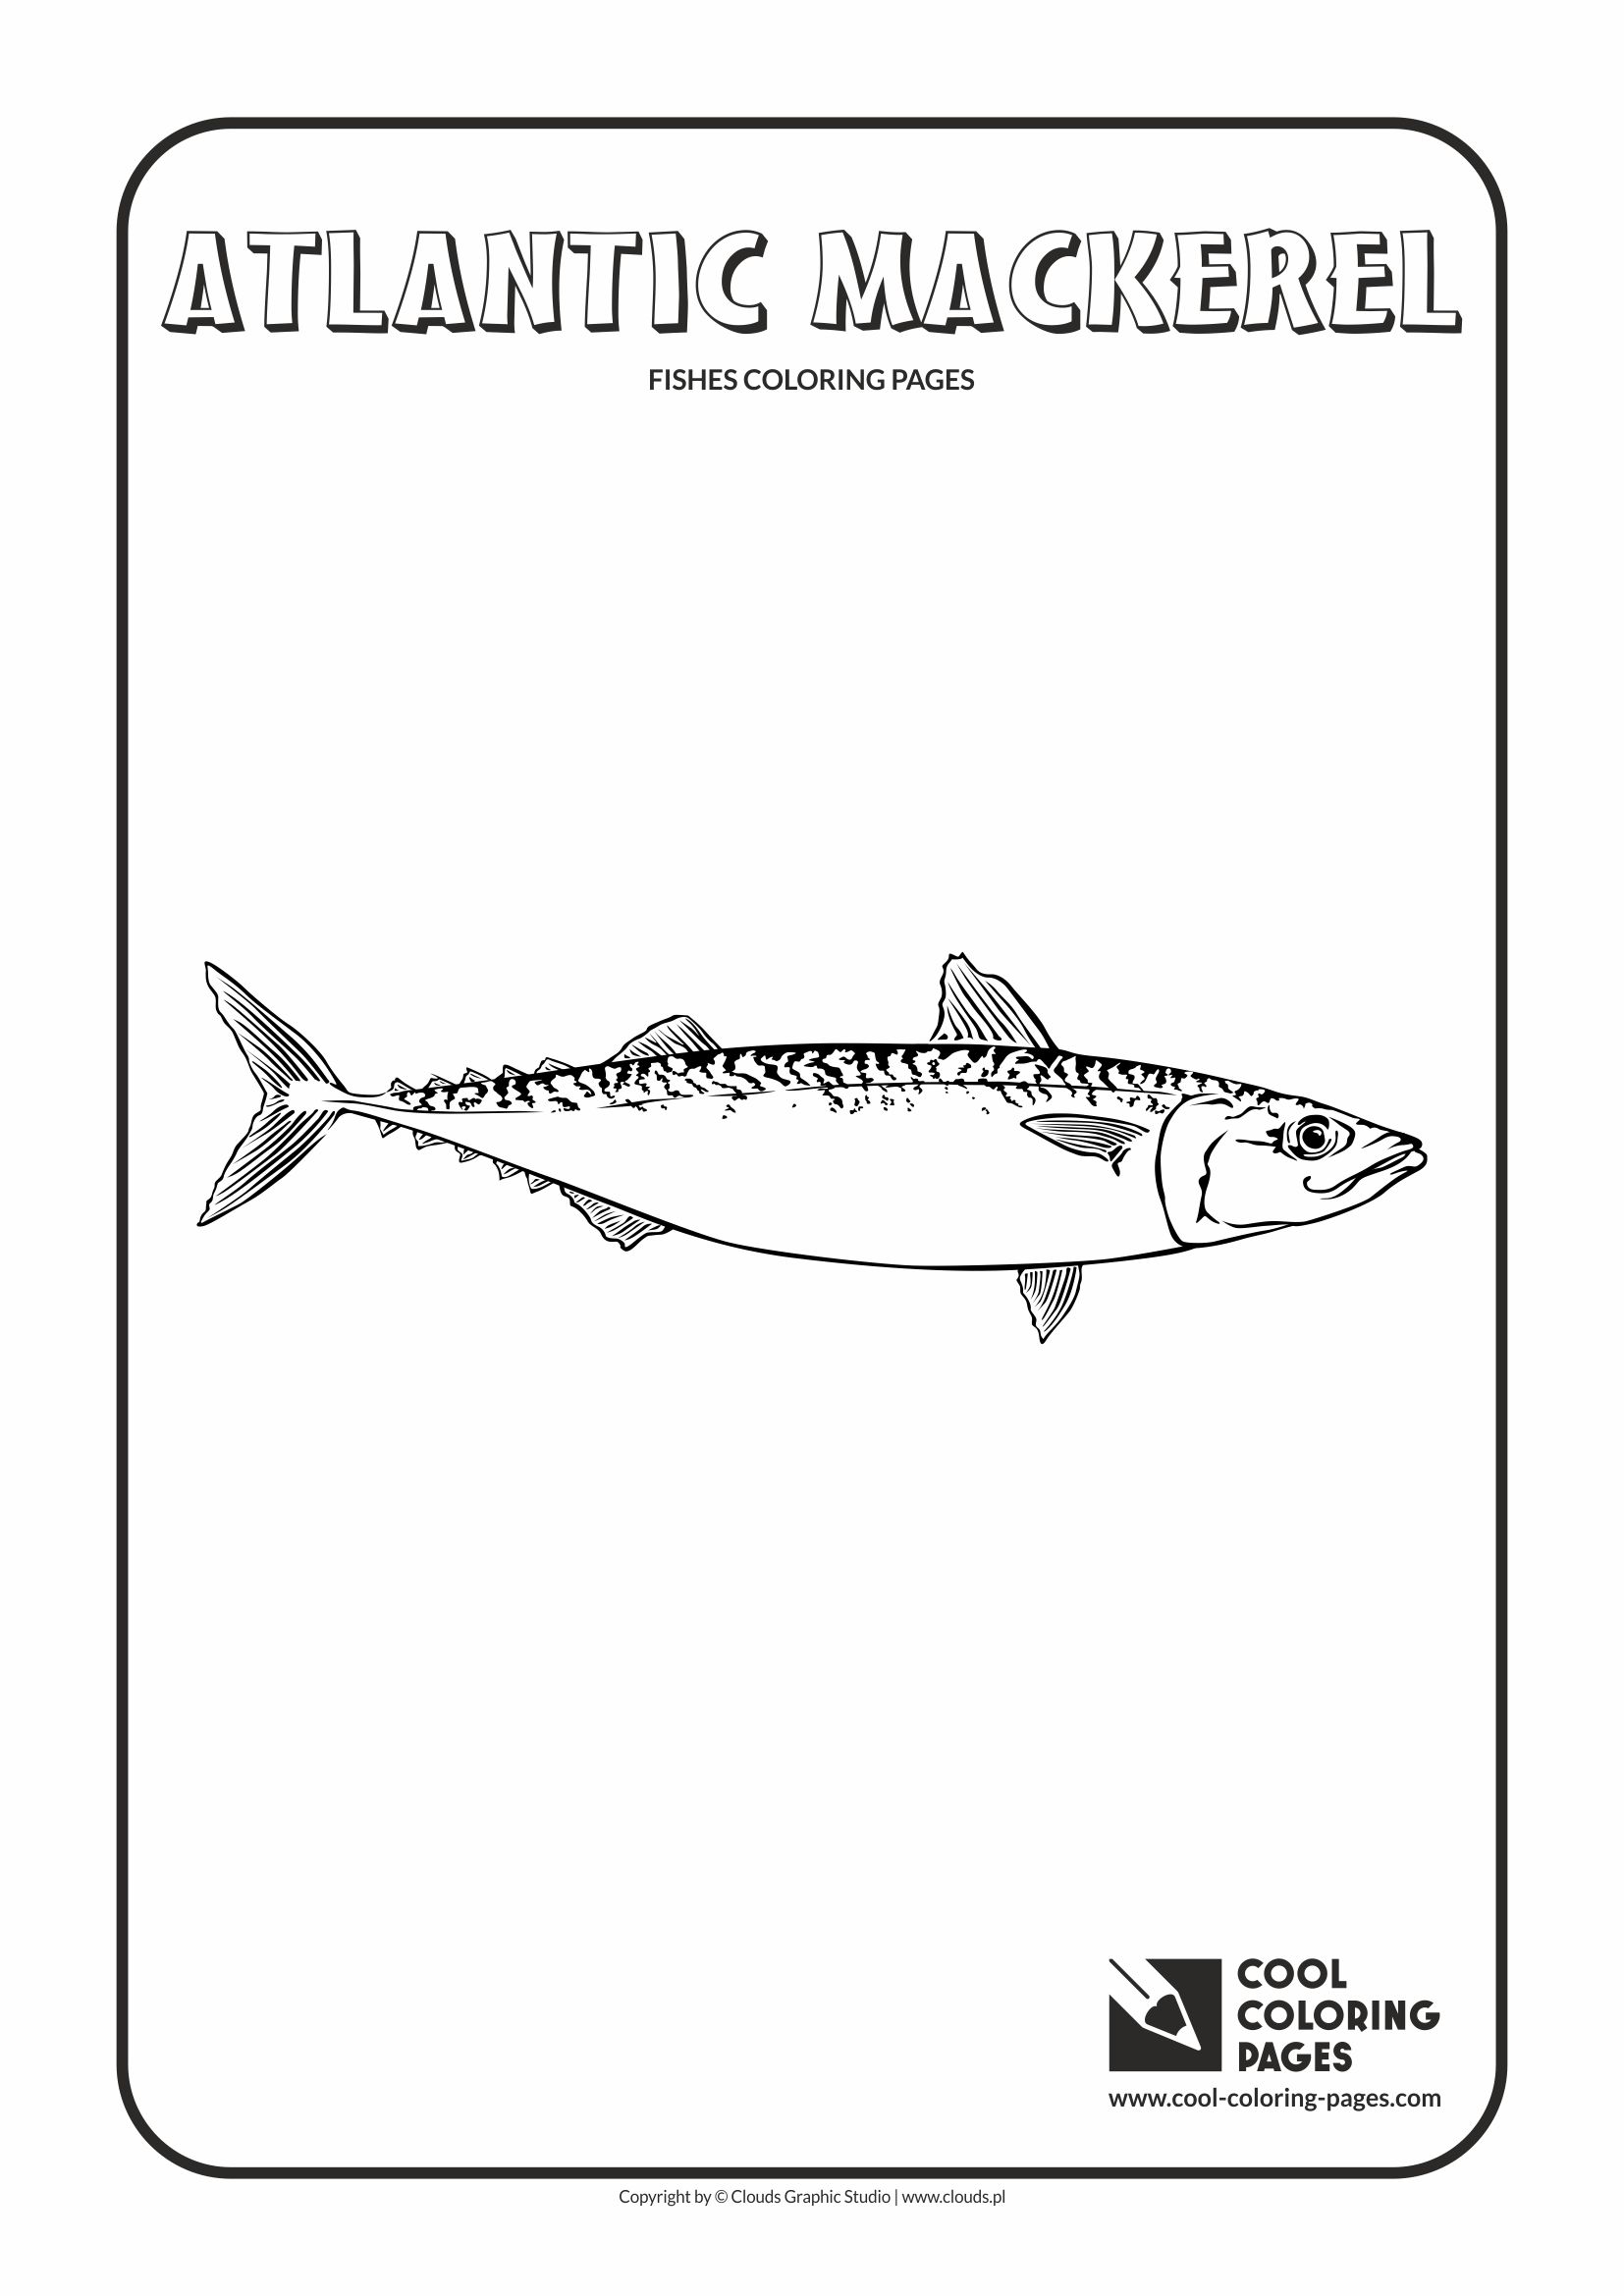 Cool Coloring Pages - Animals / Atlantic mackerel / Coloring page with atlantic mackerel